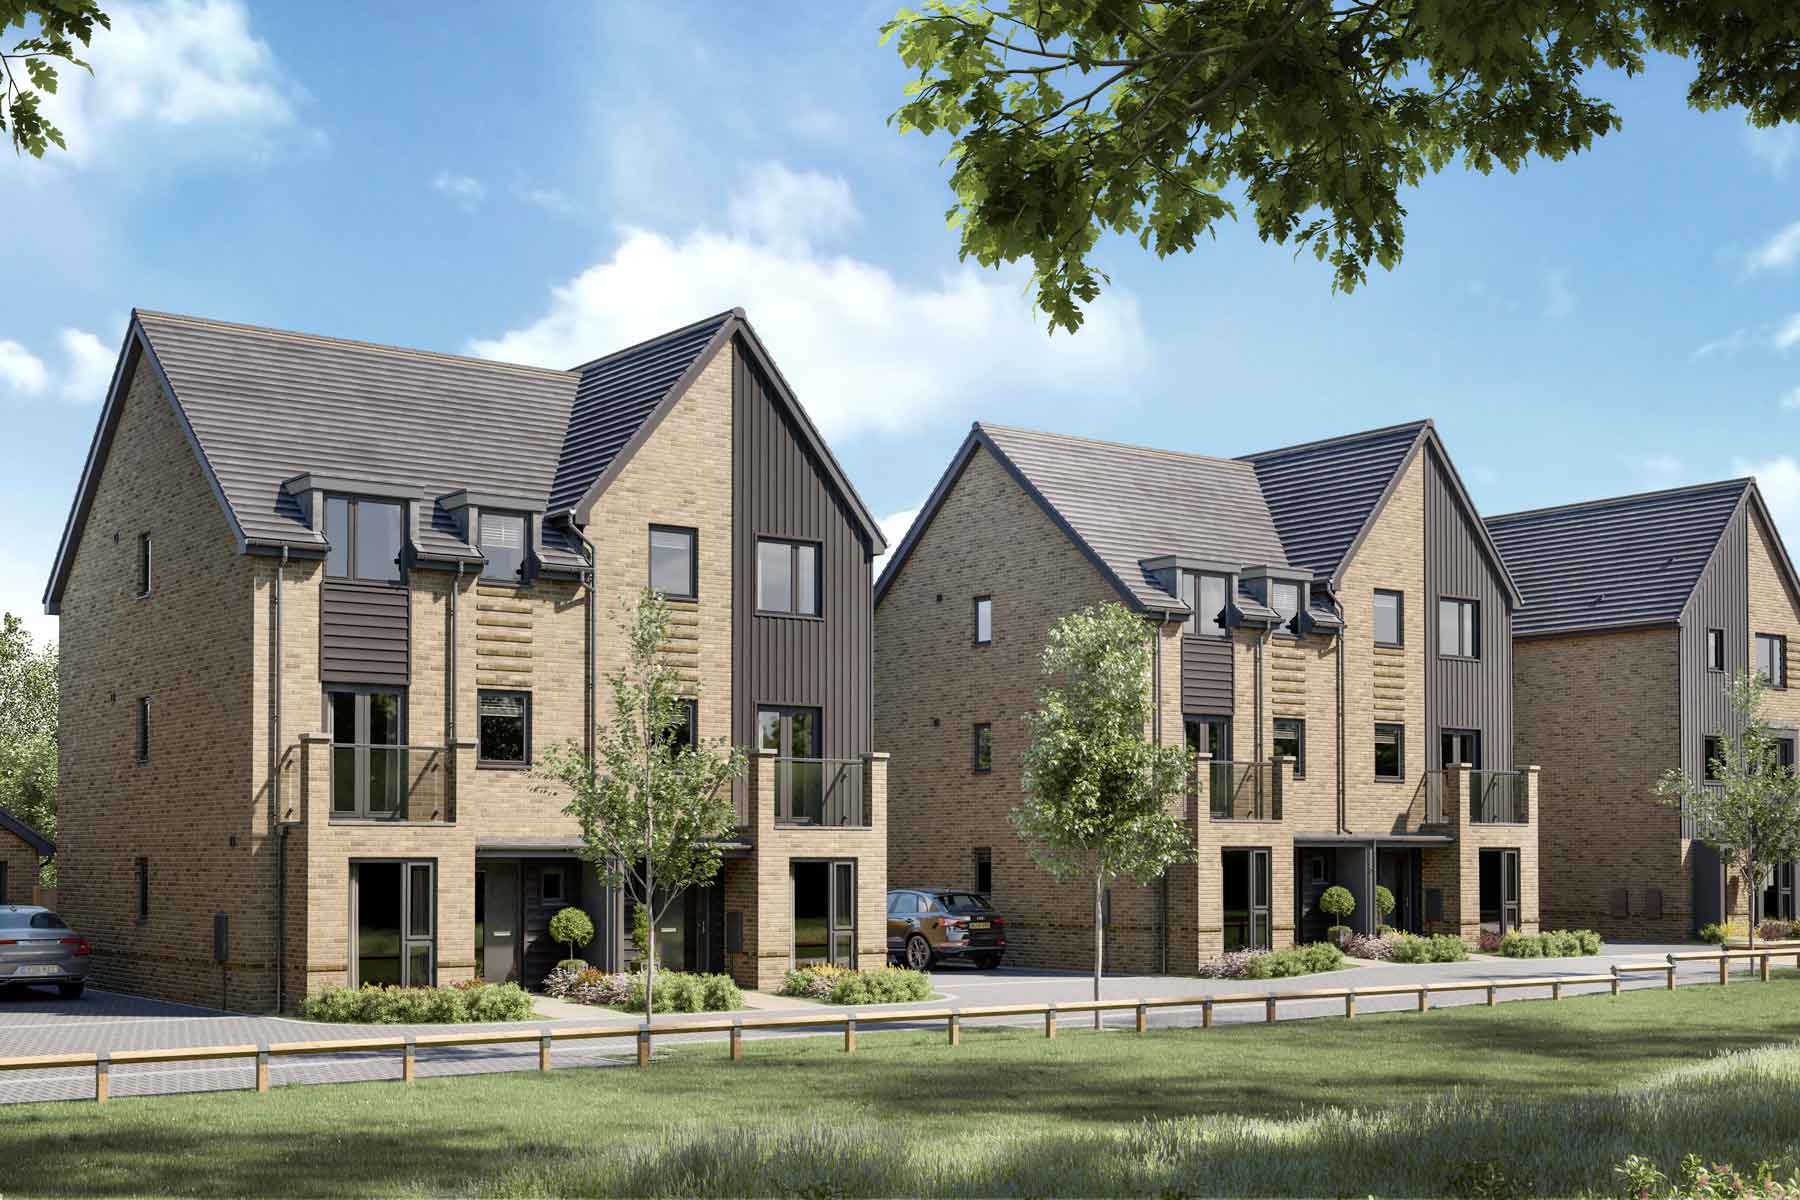 Burgoyne Square features a range of 2, 3 and 4 bedroom homes plus 2 bedroom apartments.